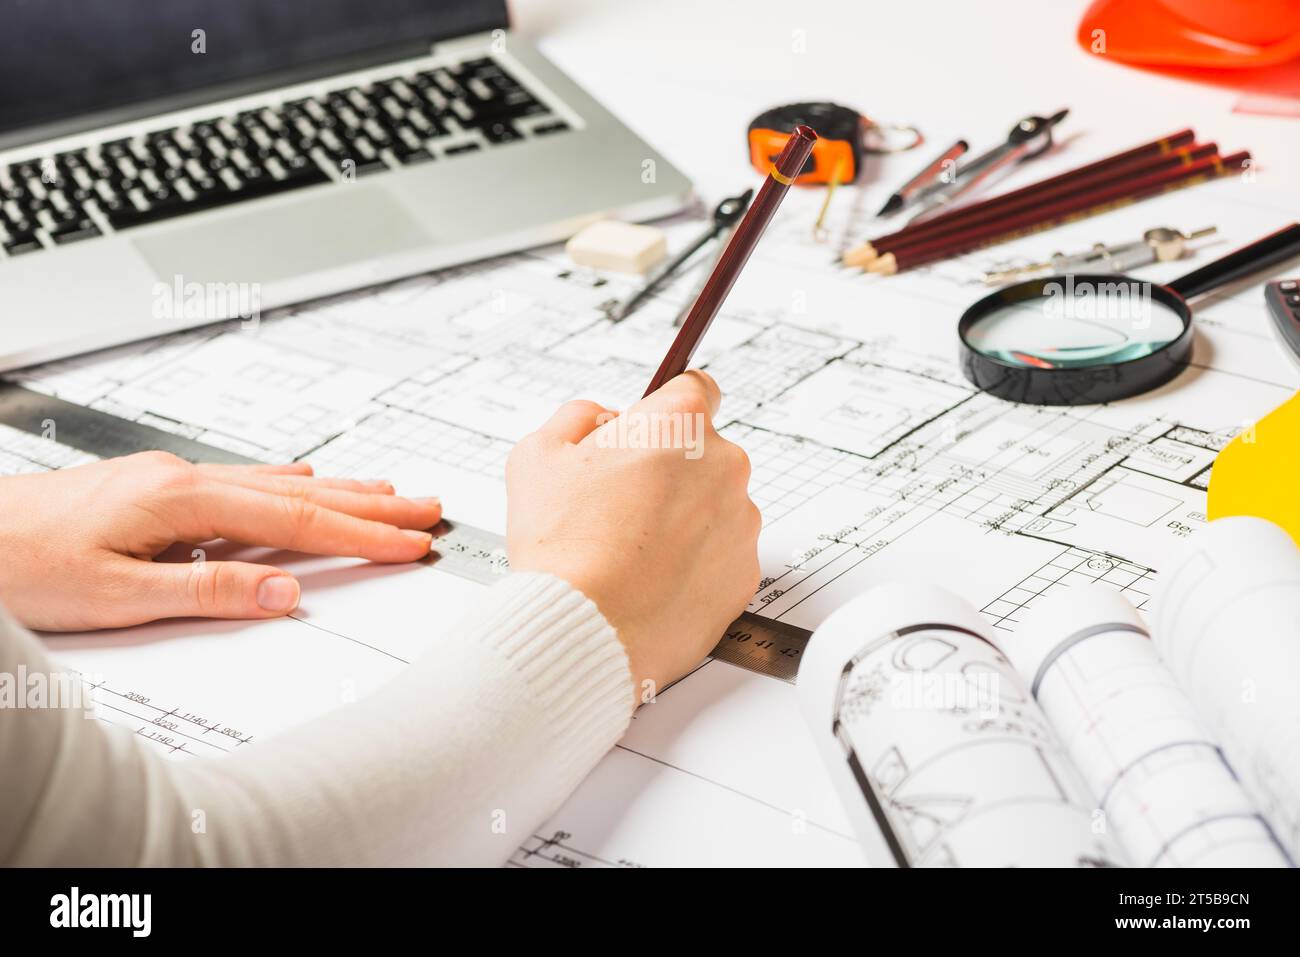 Architect drawing blueprint with pencil Stock Photo